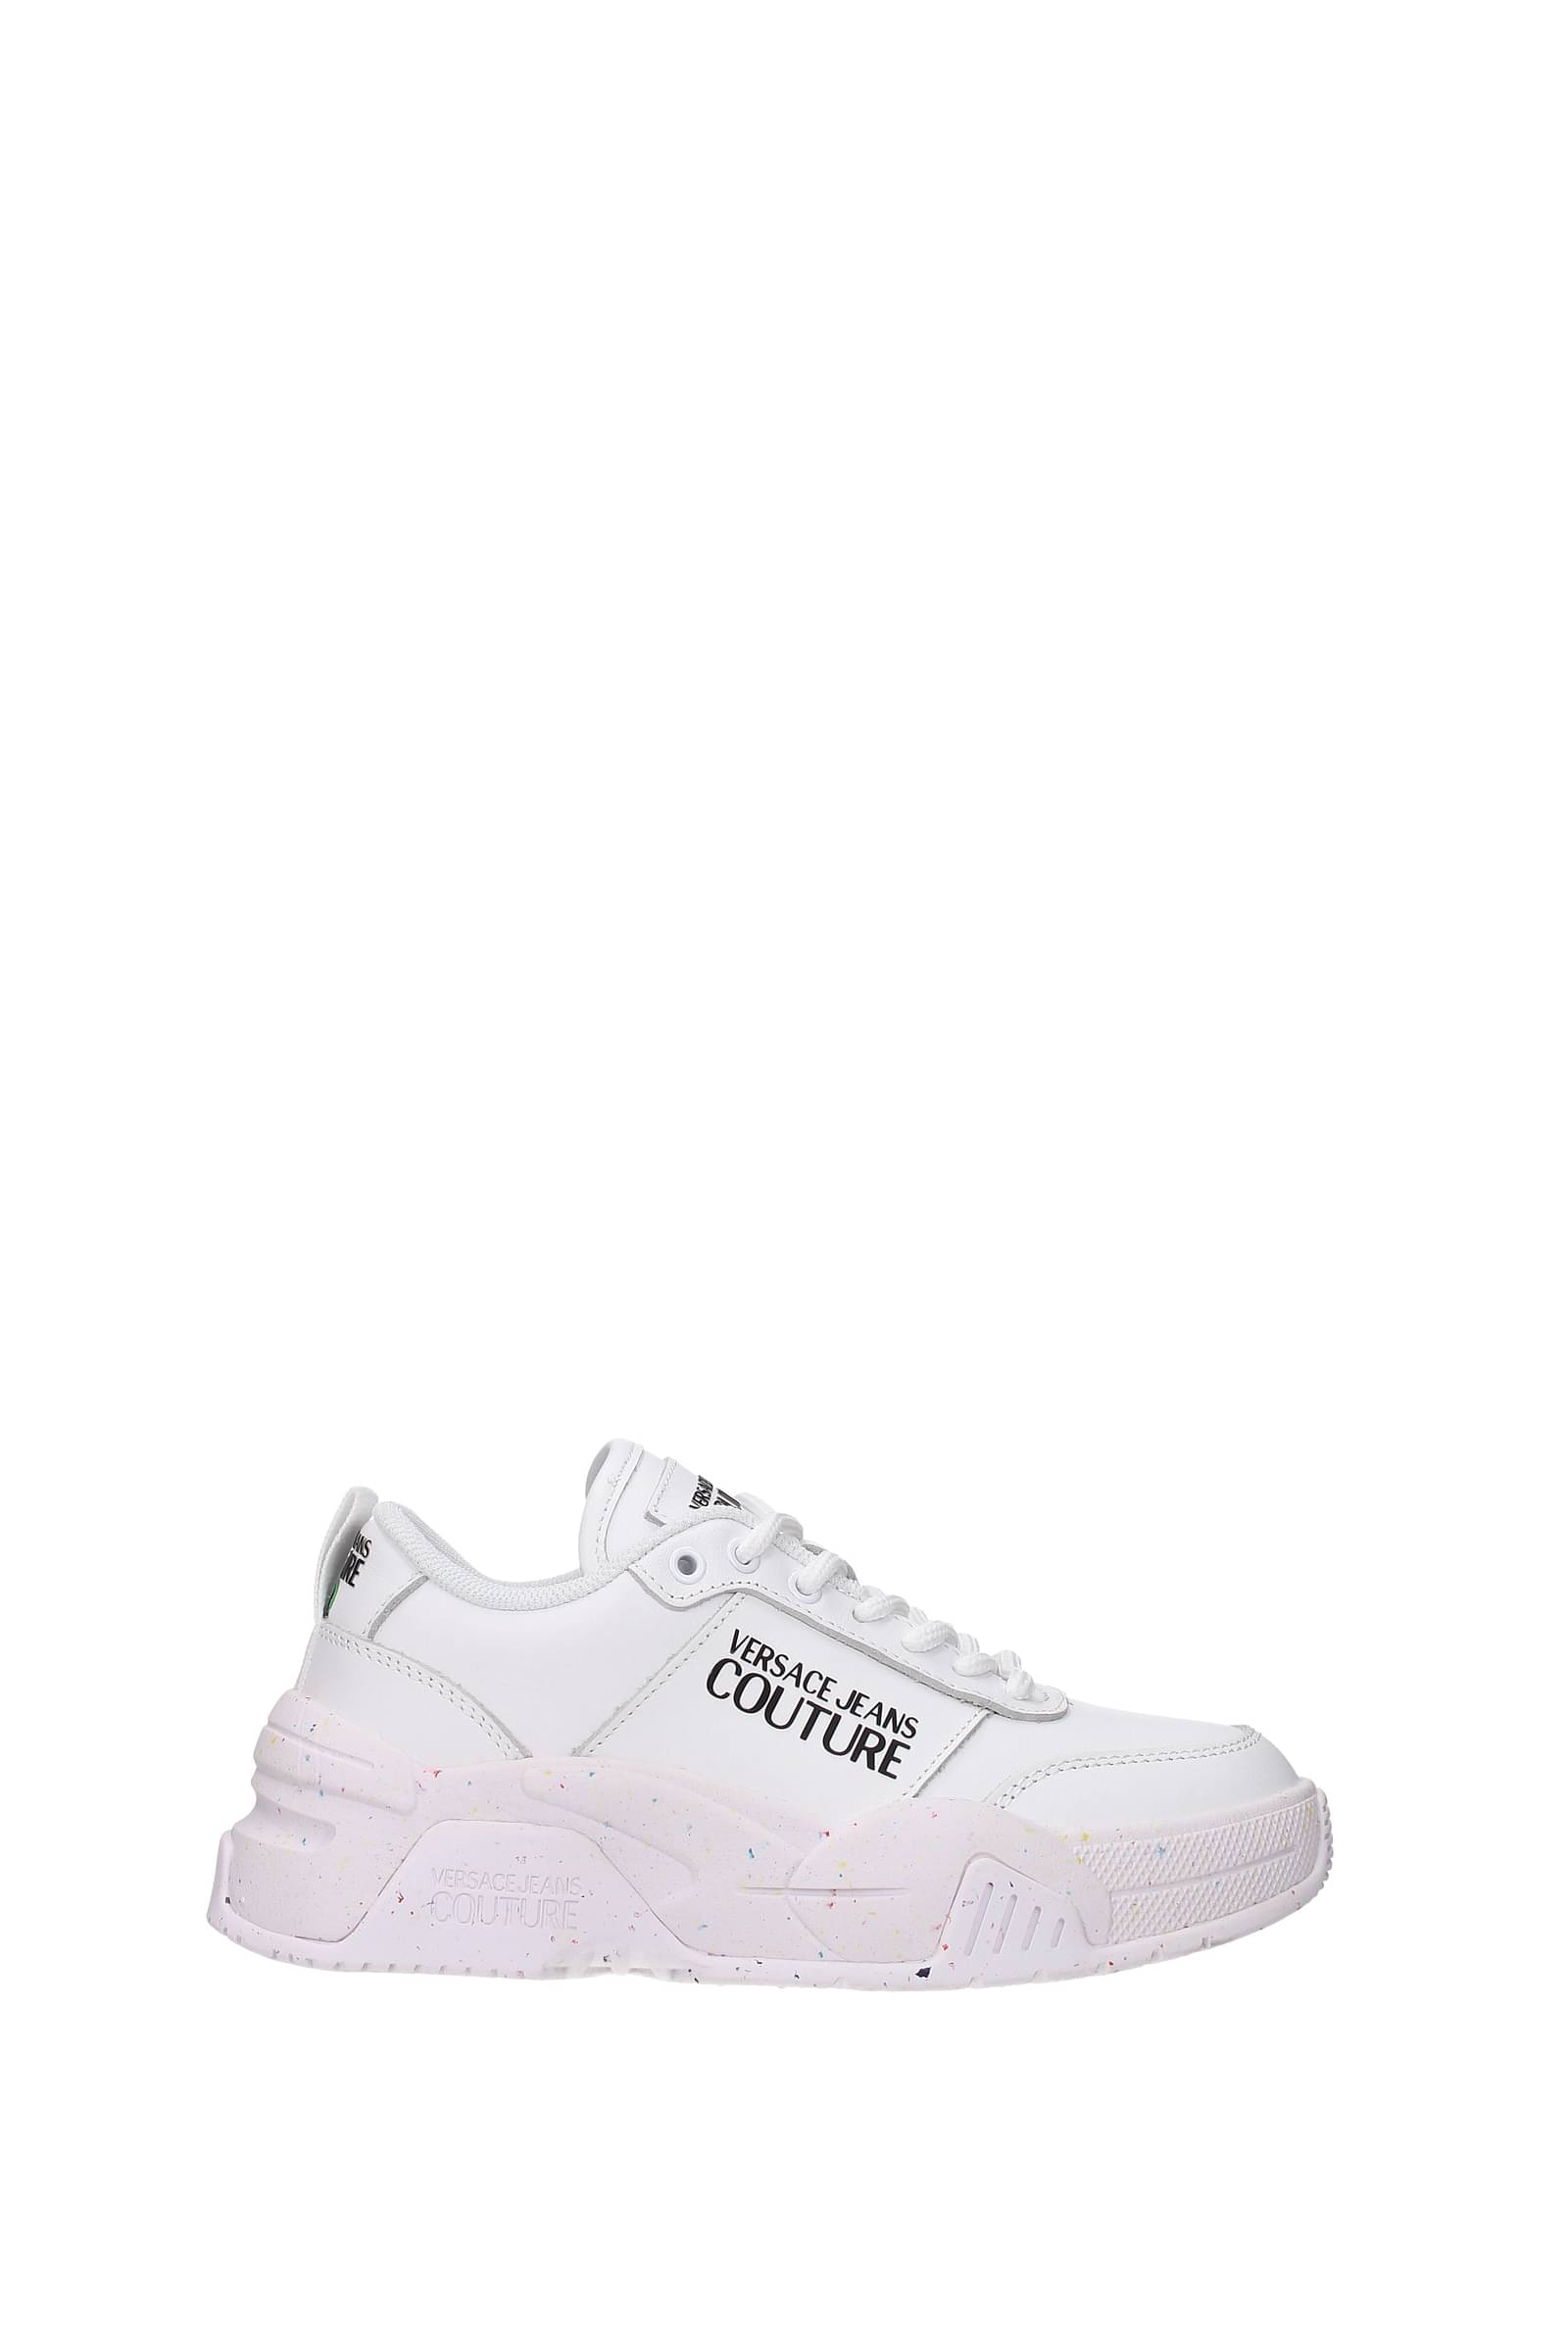 Versace Jeans Couture logo-print Leather low-top Sneakers - Farfetch